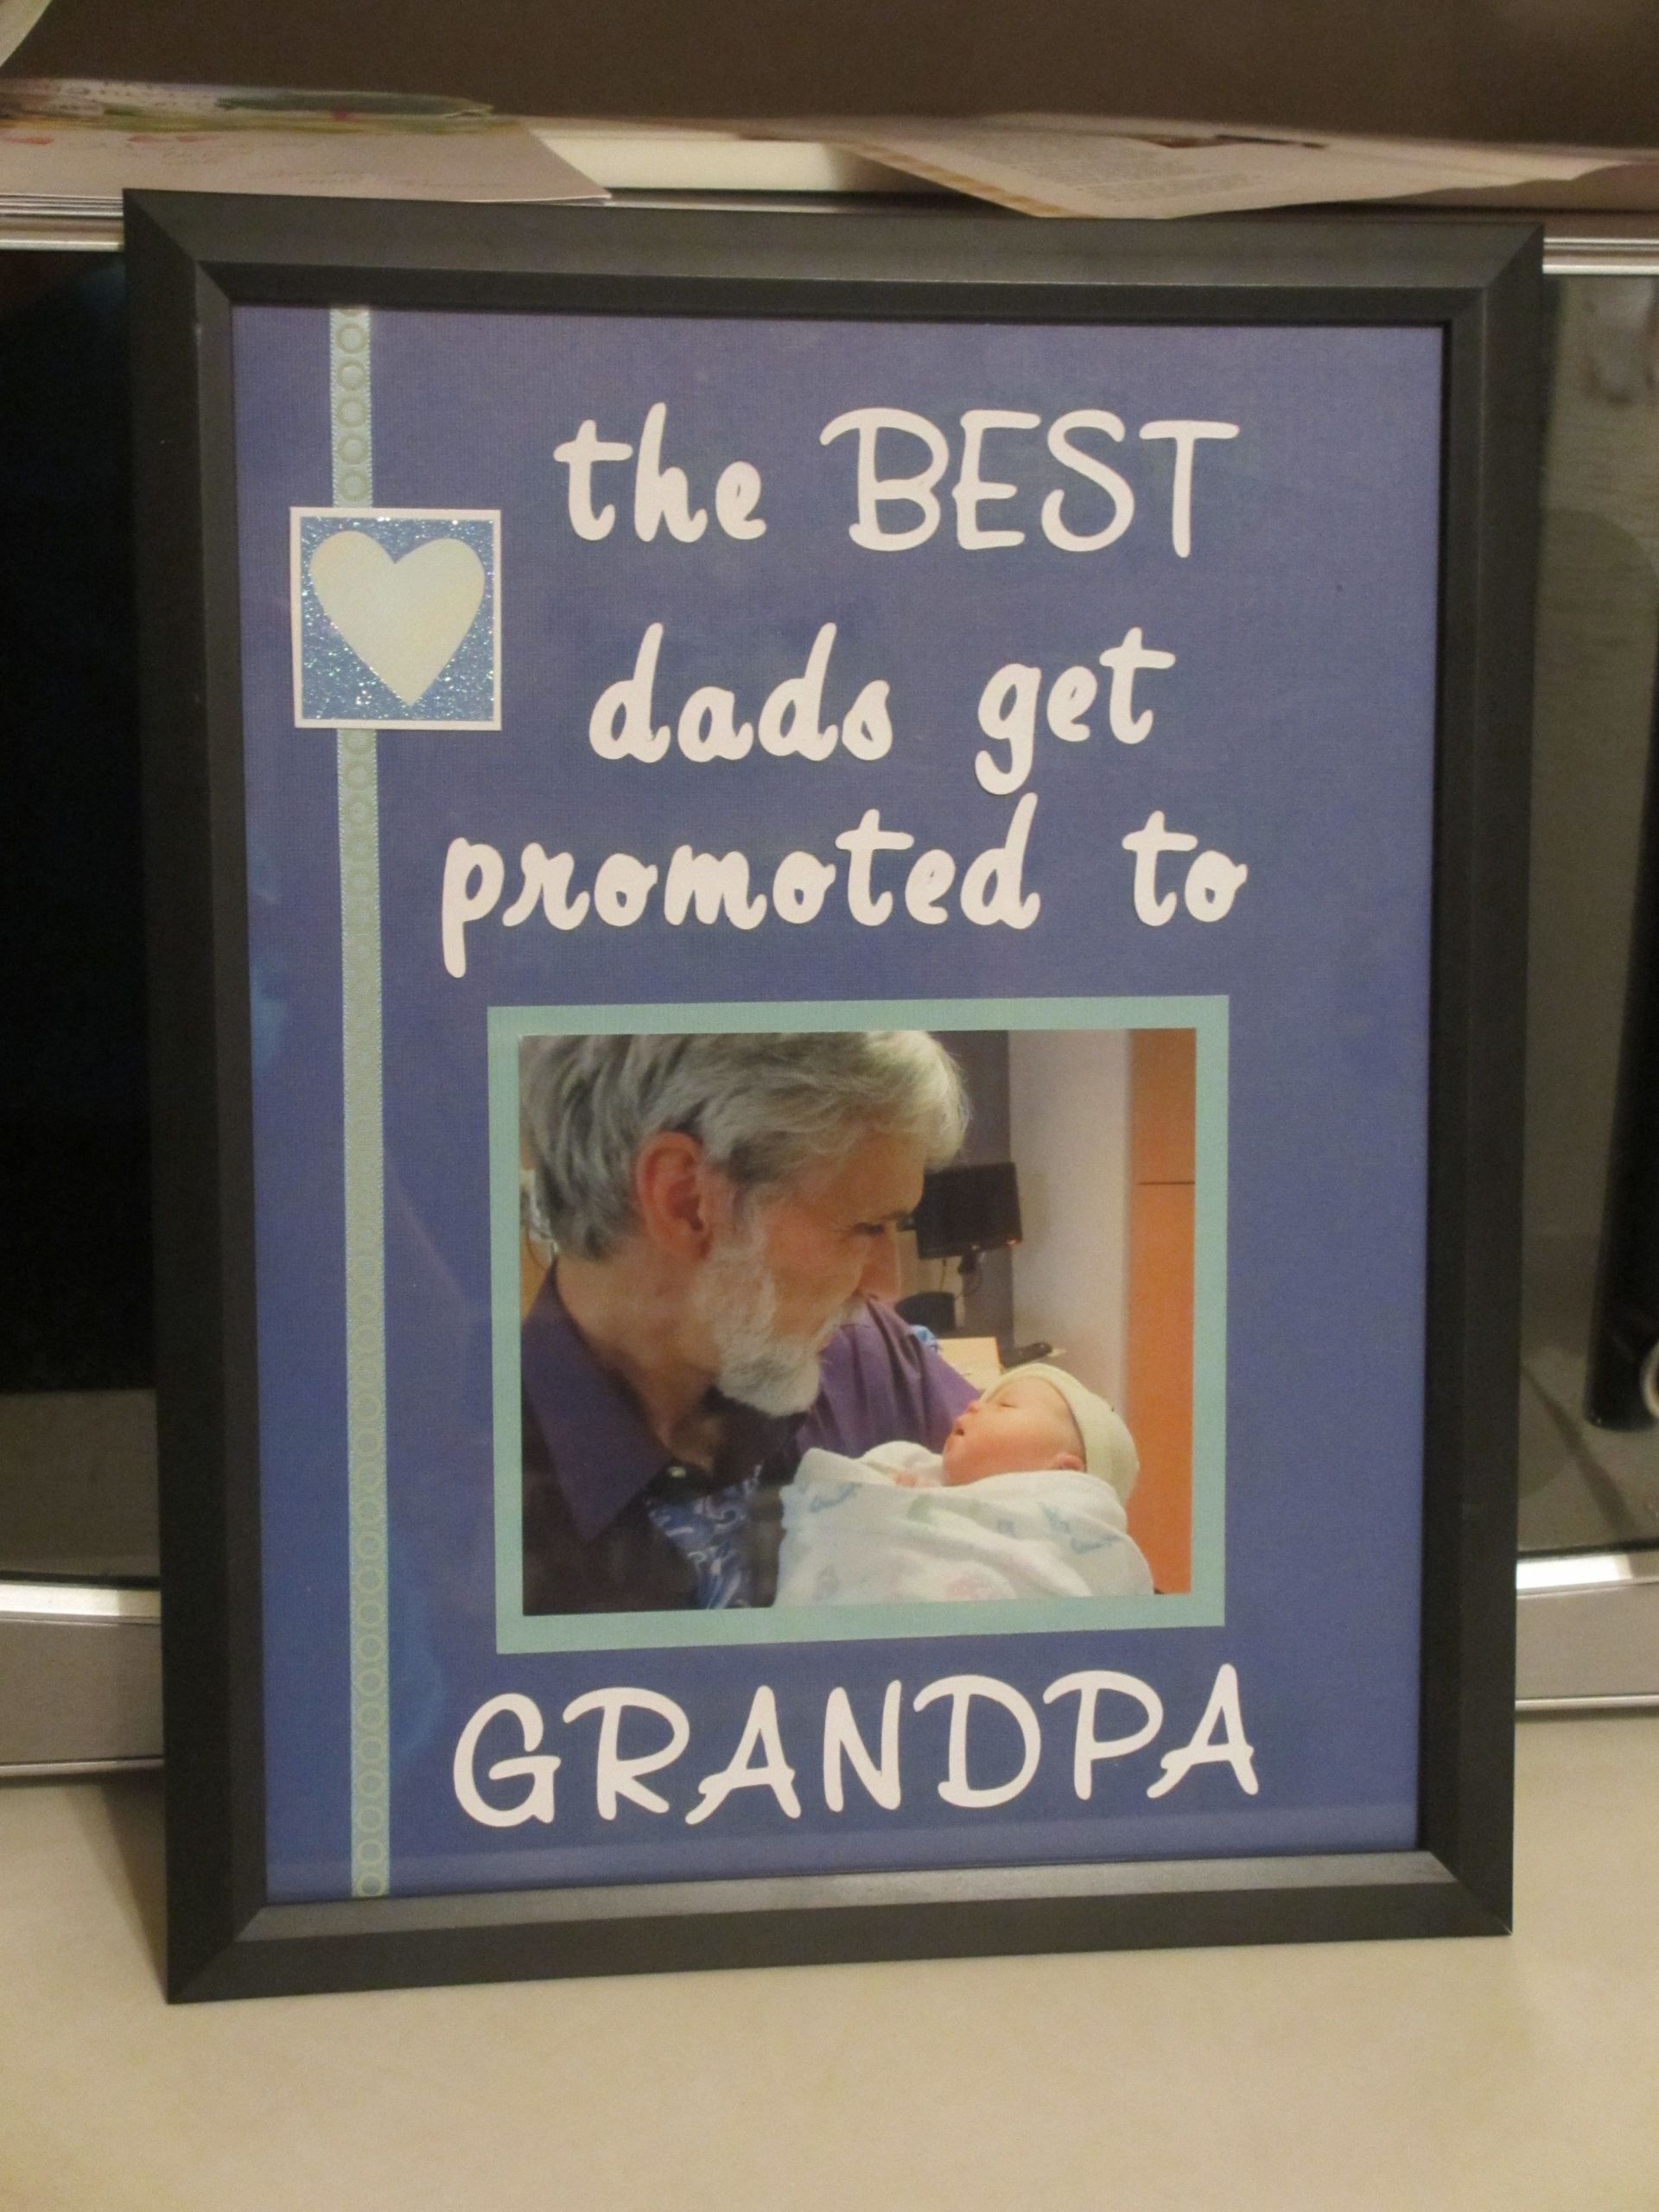 Fathers Day Gift Ideas Grandpa
 first time grandpa t idea DIY dollar store frame used